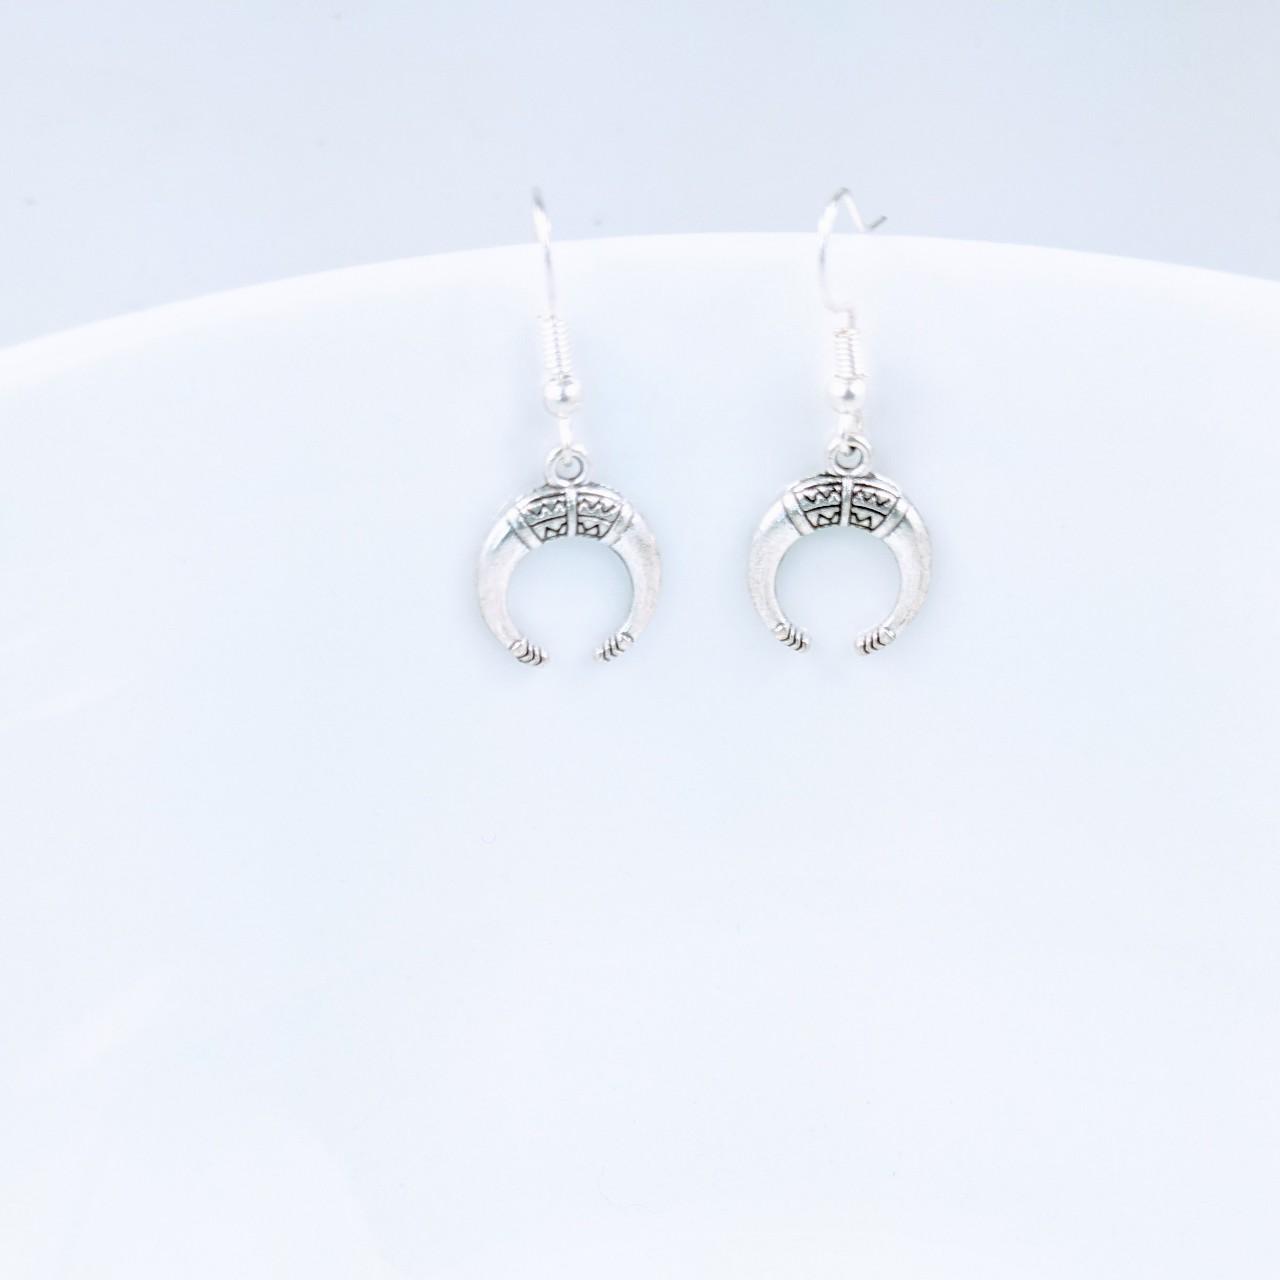 Product Image 2 - Moon Horn Earrings
Brand new. 

Made